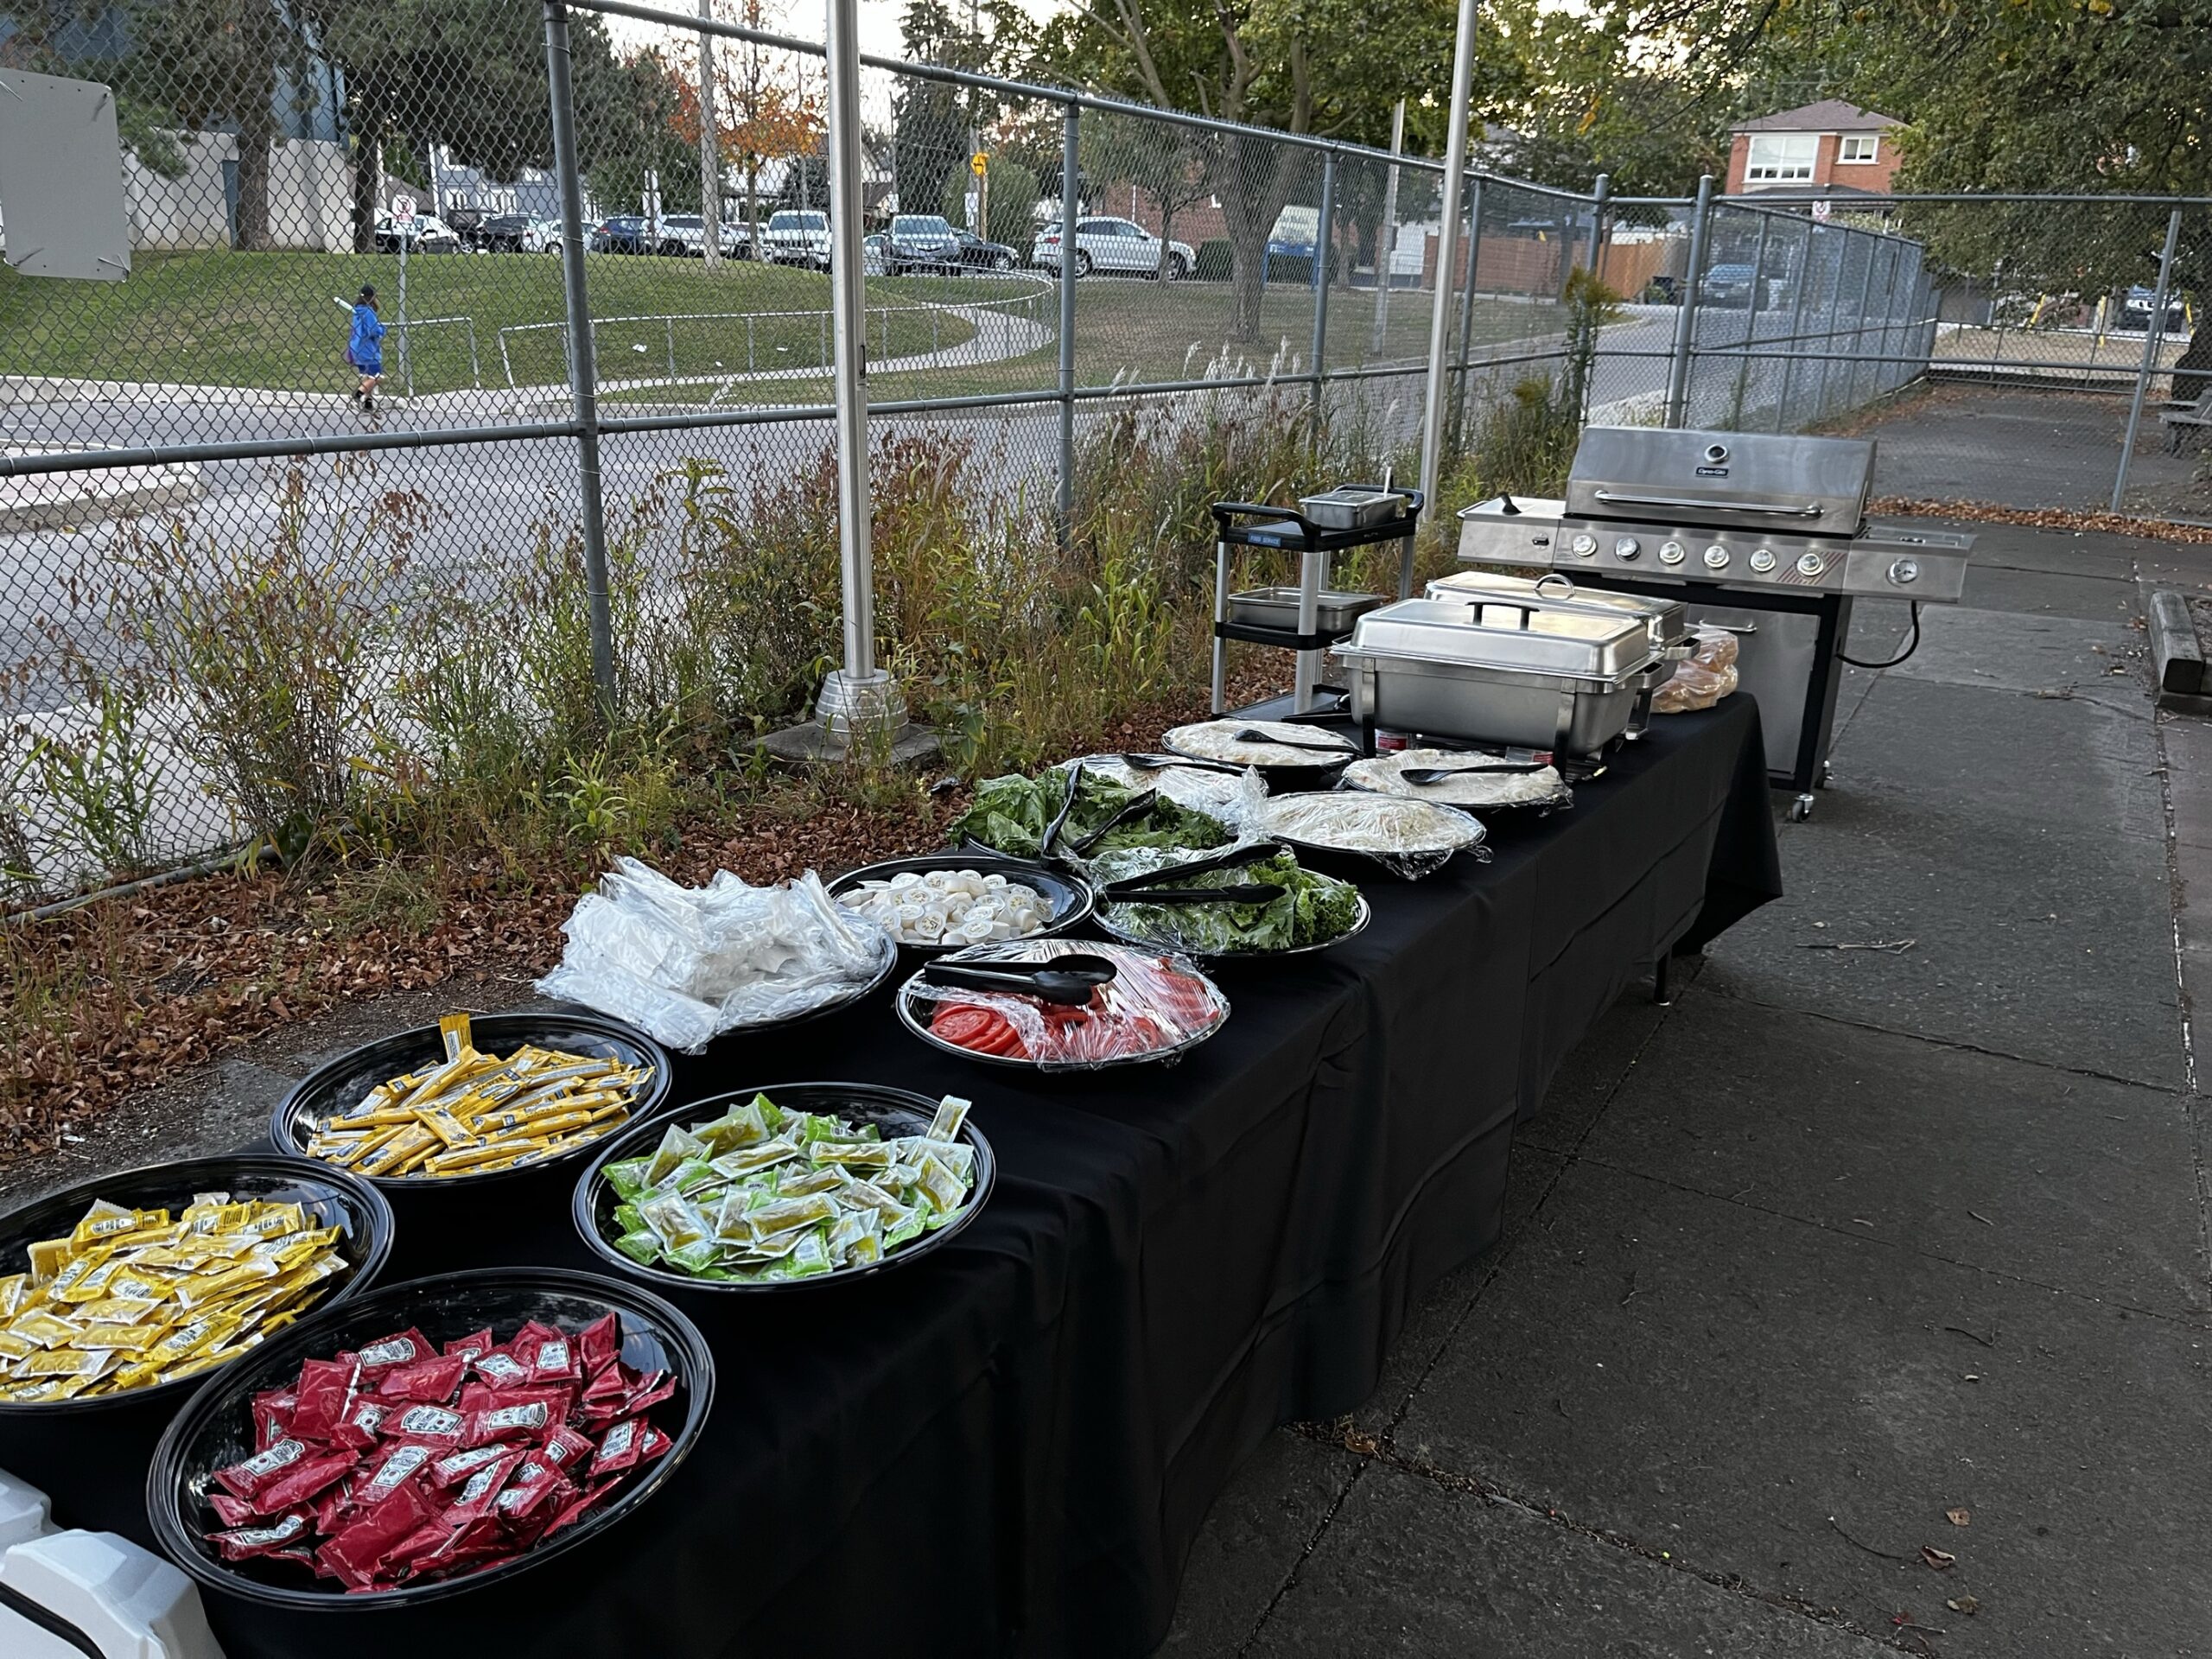 On September 27, Cedarvale House (located at 540 Cedarvale Ave.), in collaboration with WoodGreen’s Access and Inclusion Advisory Committee (AIAC), hosted a community BBQ at Stan Wadlow Clubhouse.